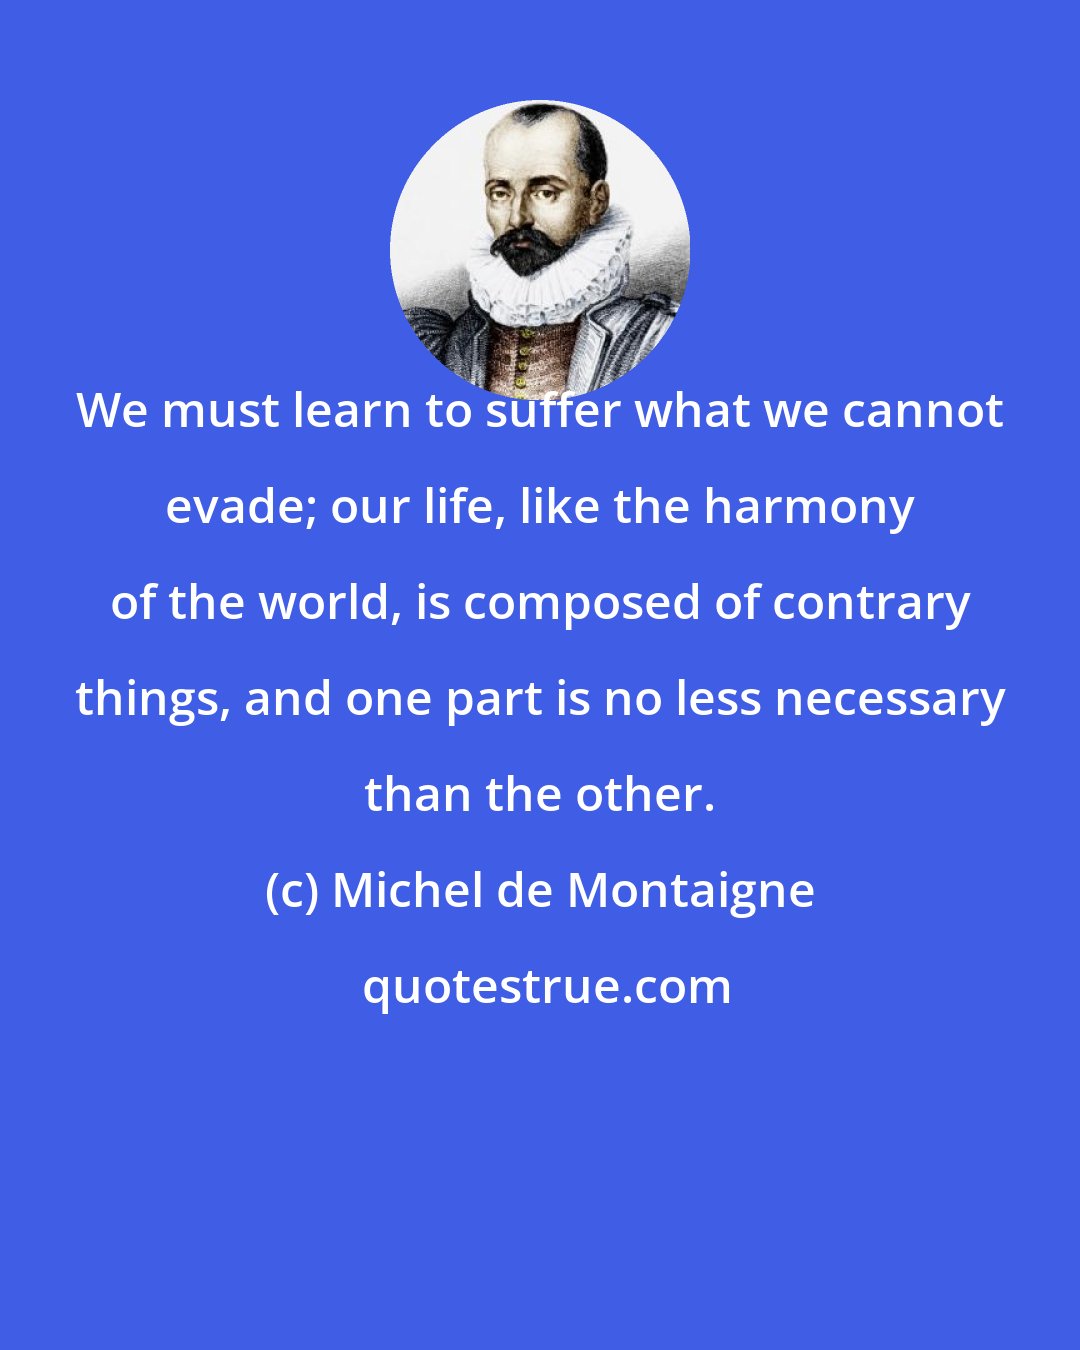 Michel de Montaigne: We must learn to suffer what we cannot evade; our life, like the harmony of the world, is composed of contrary things, and one part is no less necessary than the other.